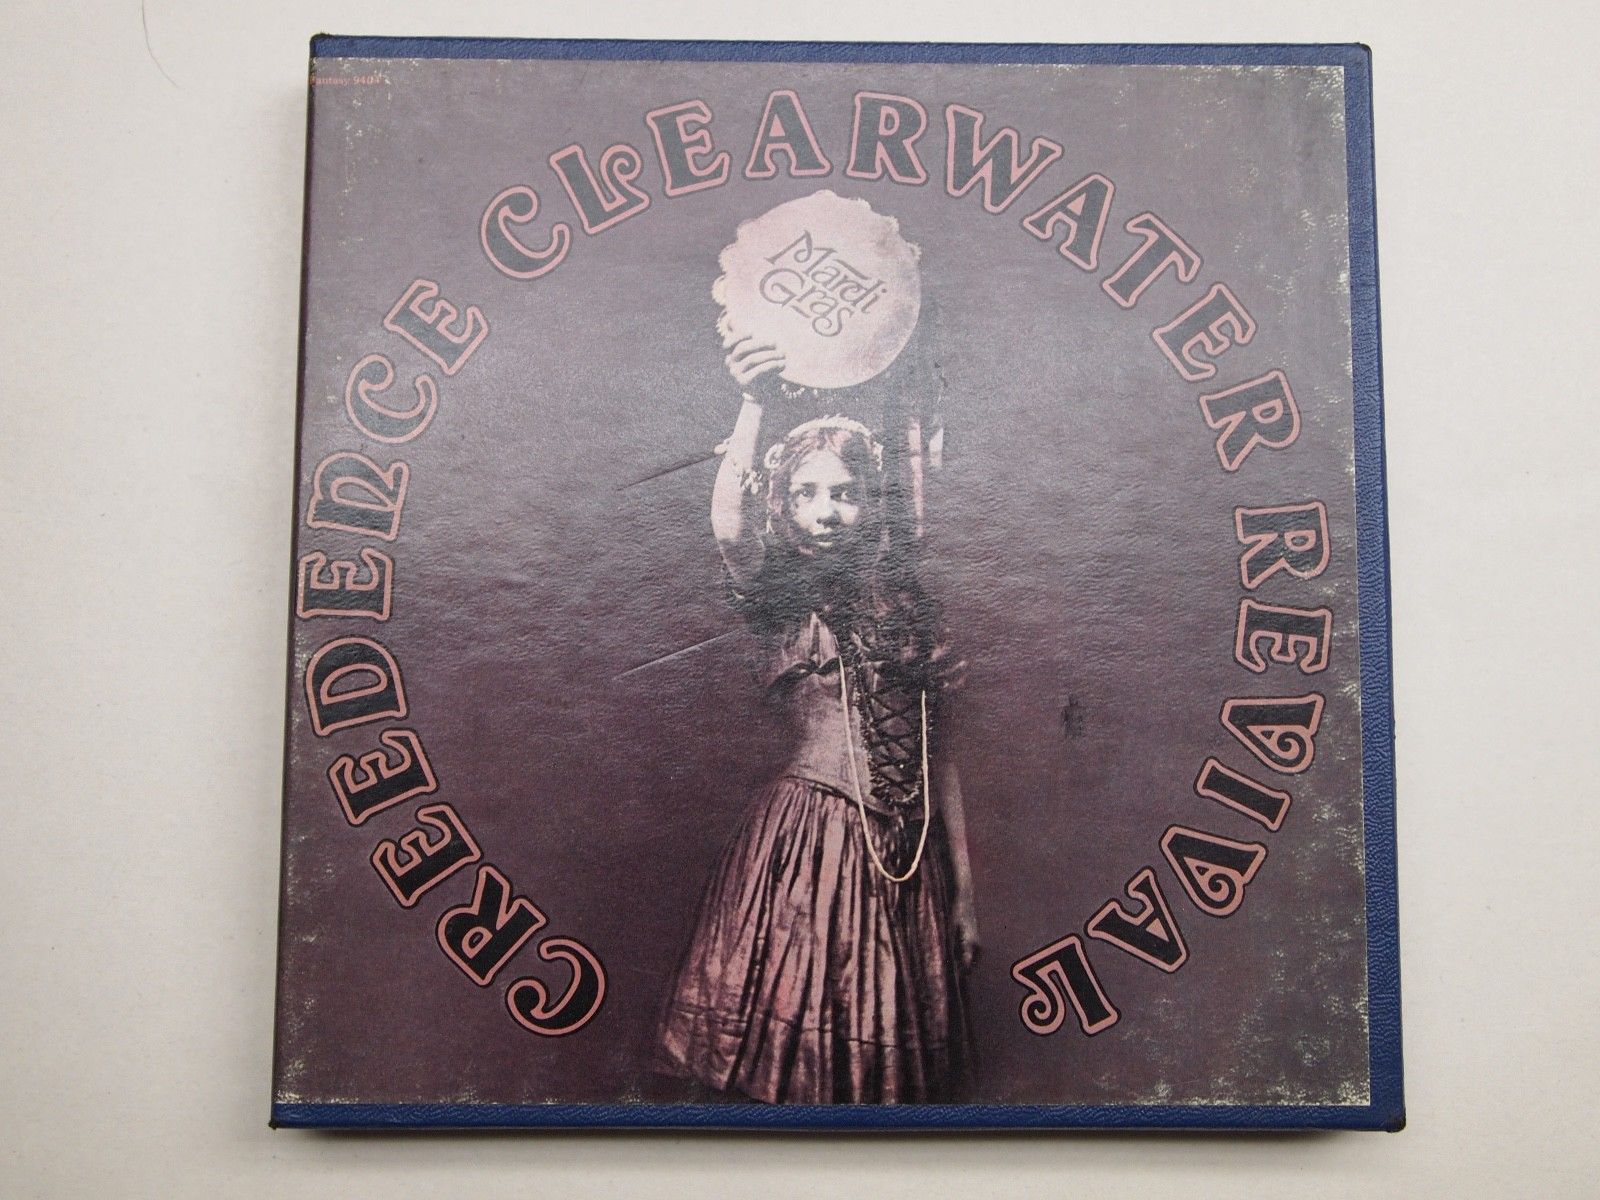  CREEDENCE CLEARWATER REVIVAL MARDI GRAS FANTASY RECORDS REEL  TO REEL TAPE - auction details